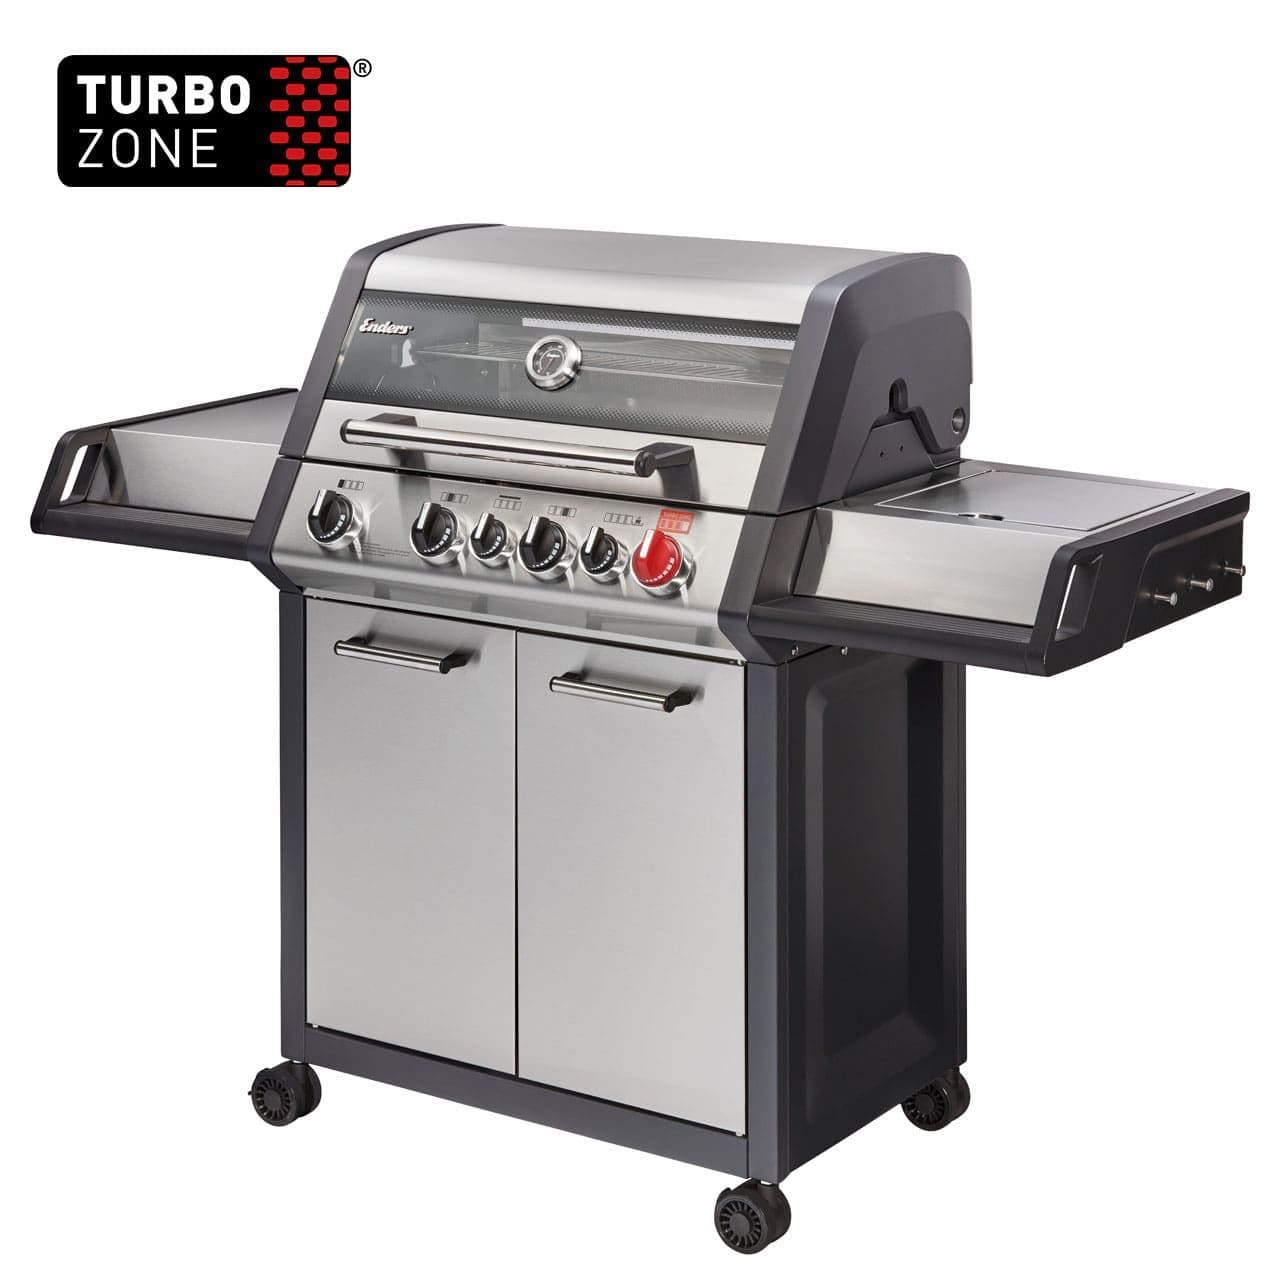 EN83786 Enders from Lifestyle Monroe Pro 4 Sik Turbo Gas Barbecue JD Catering Equipment Solutions Ltd